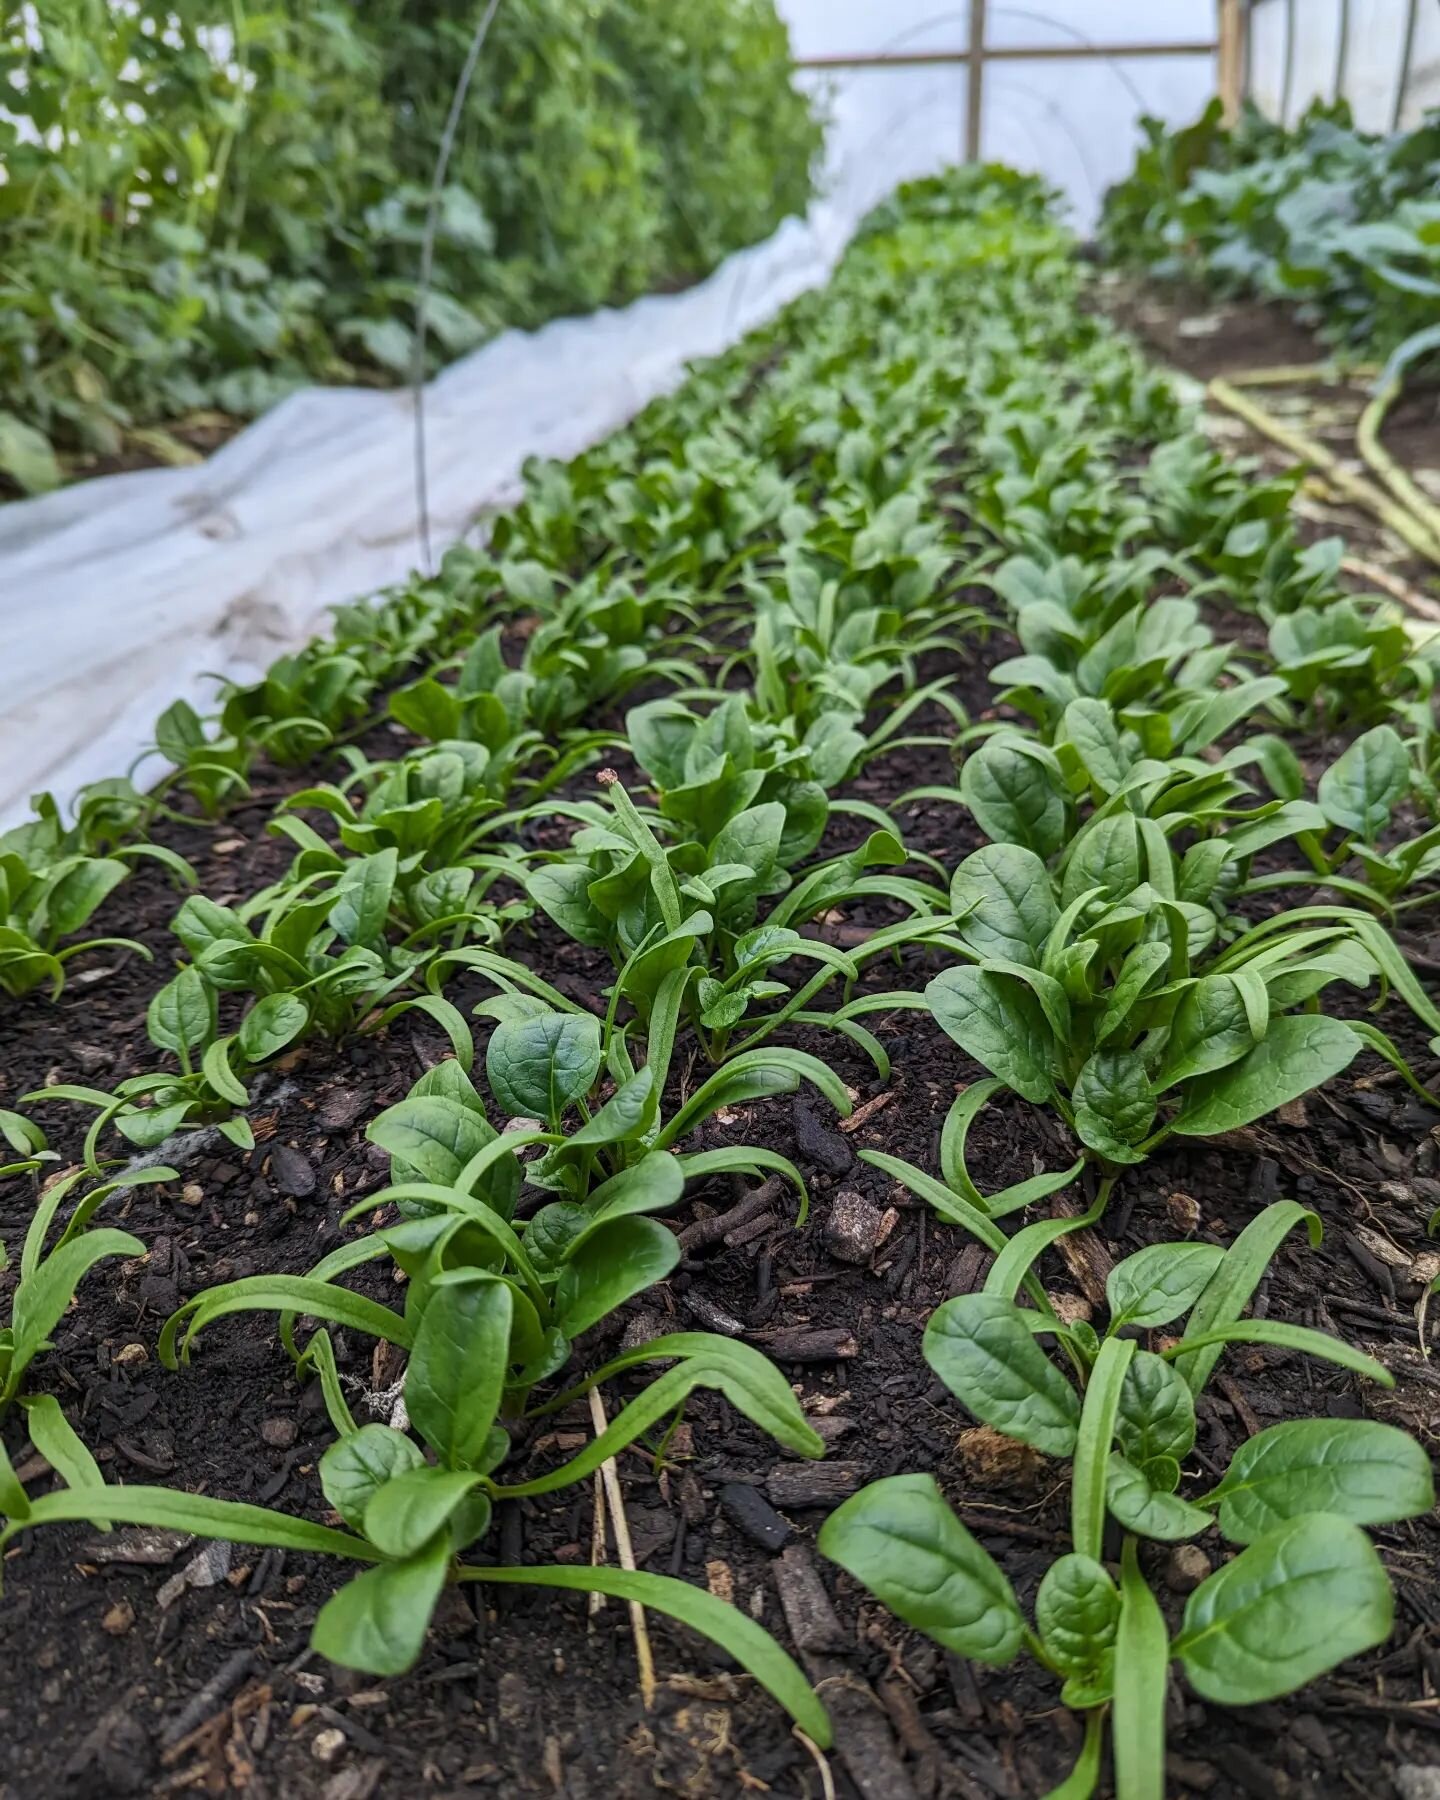 There's not much better than seeing a new bed of spinach grow on a chilly day🌱